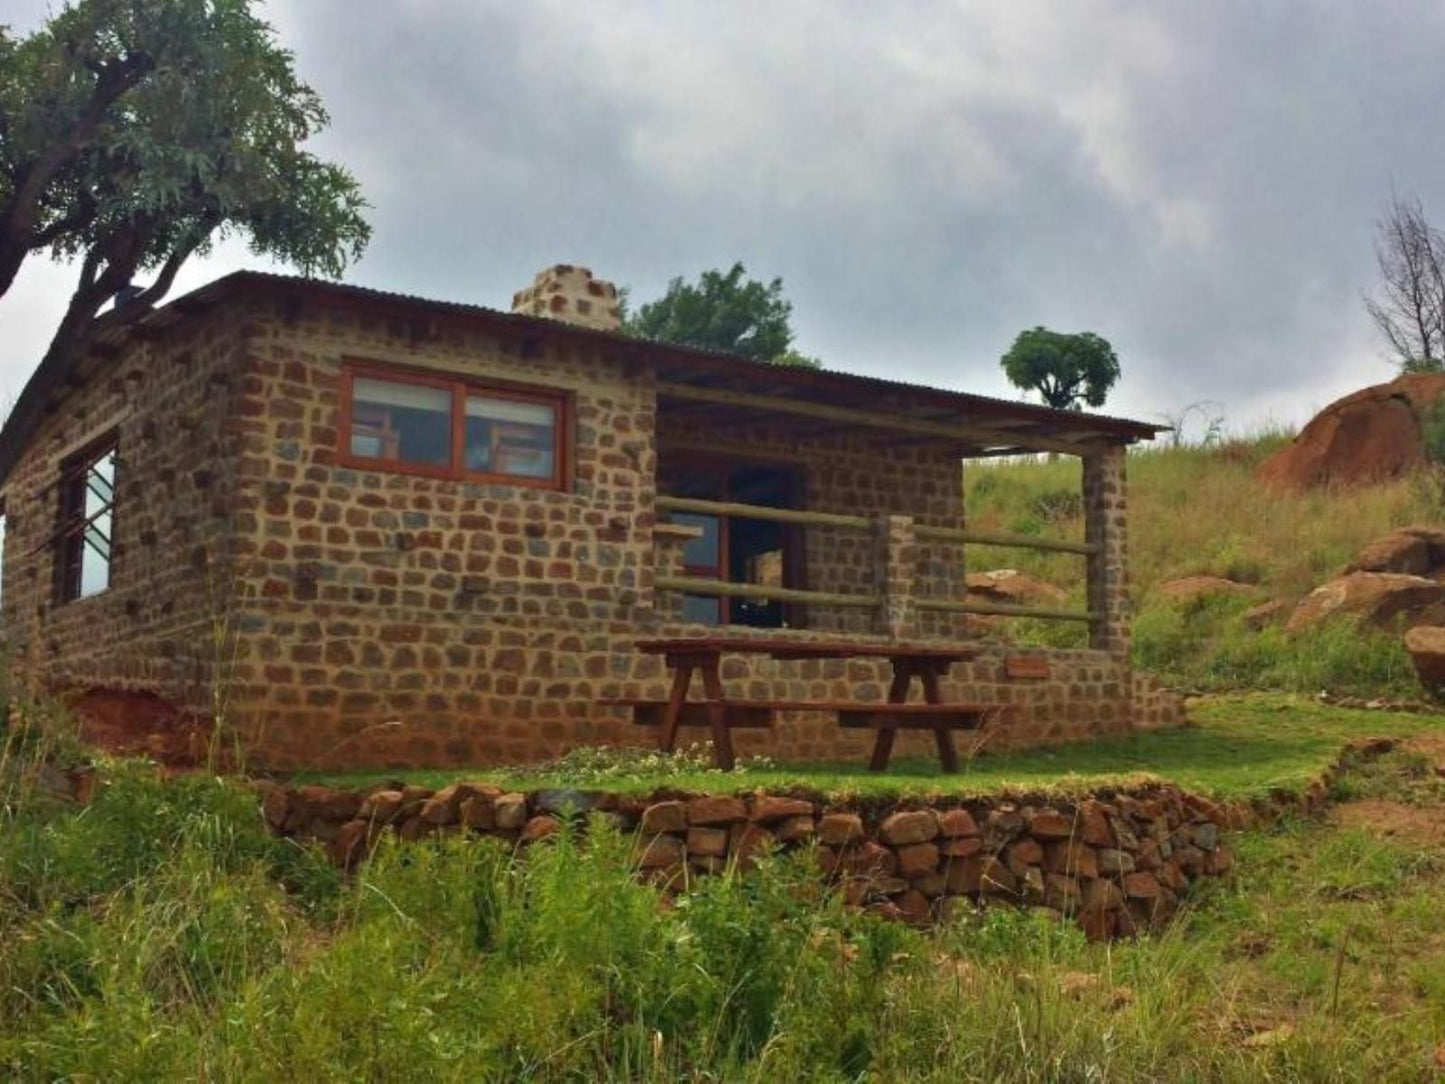 Woolly Bugger Farm Dullstroom Mpumalanga South Africa Building, Architecture, Ruin